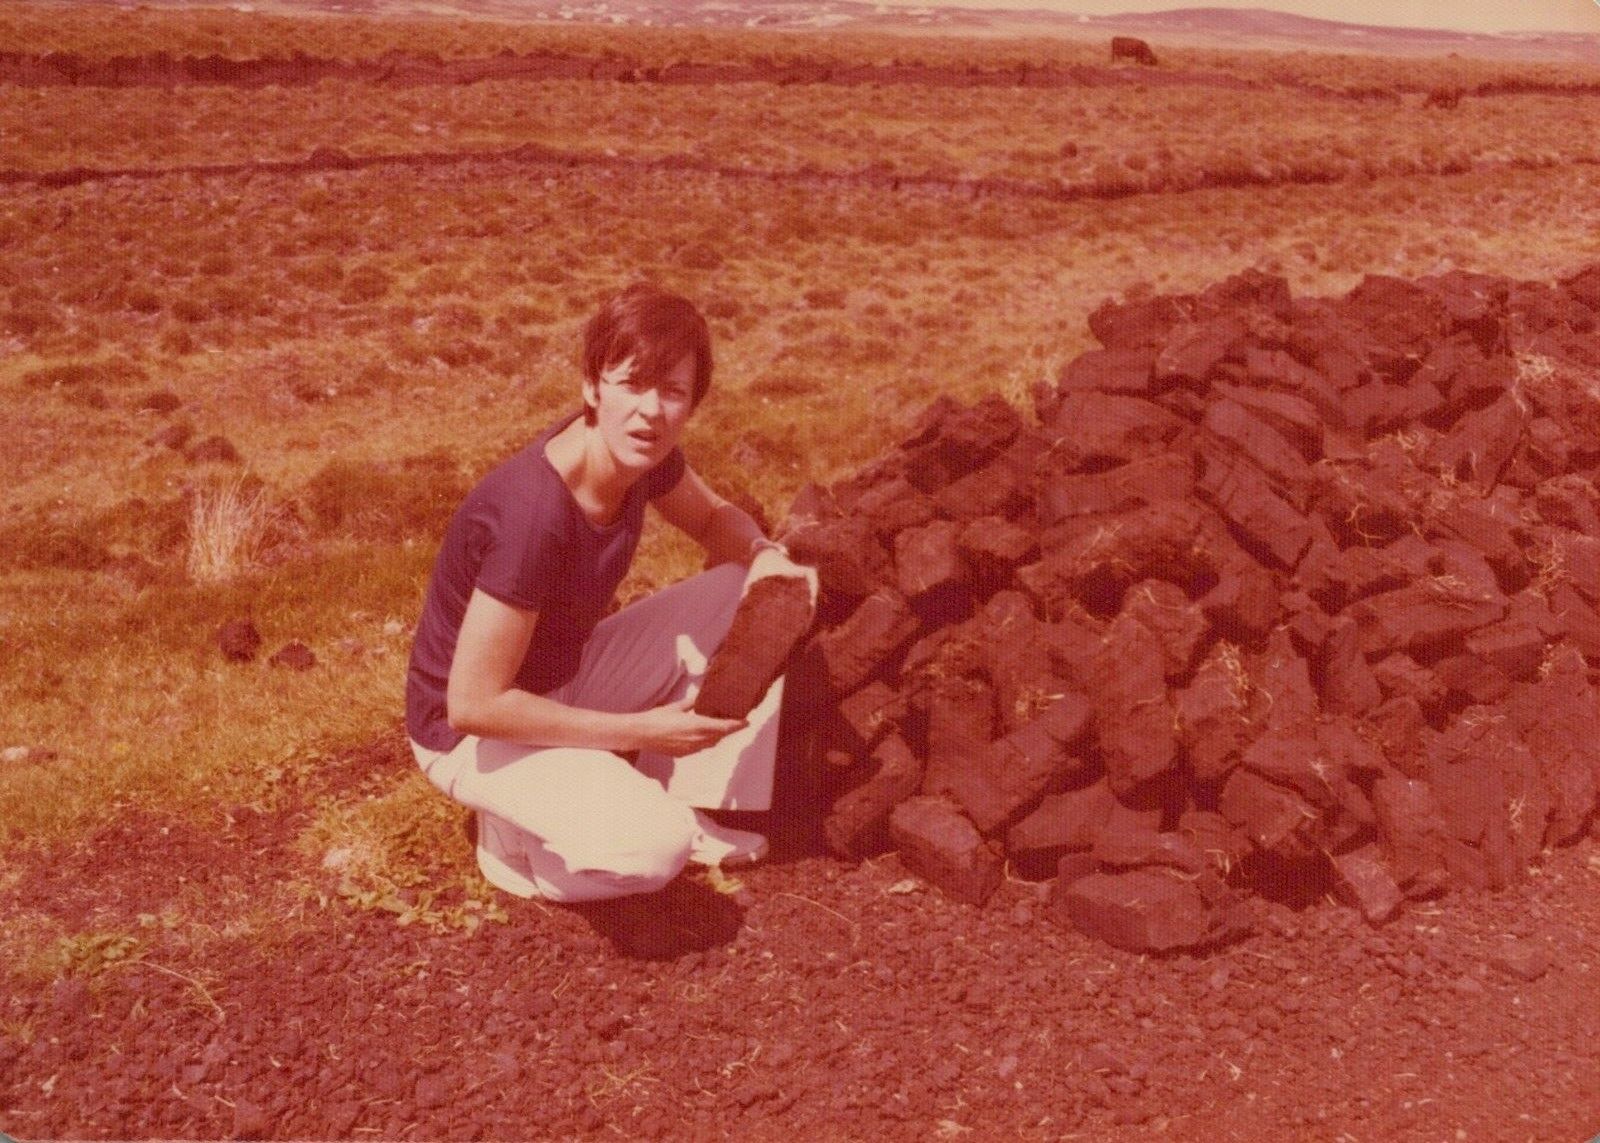 Vintage Found Photo - 1975 - Pretty Woman Holds Clumps Of Dirt Or Rocks Ireland